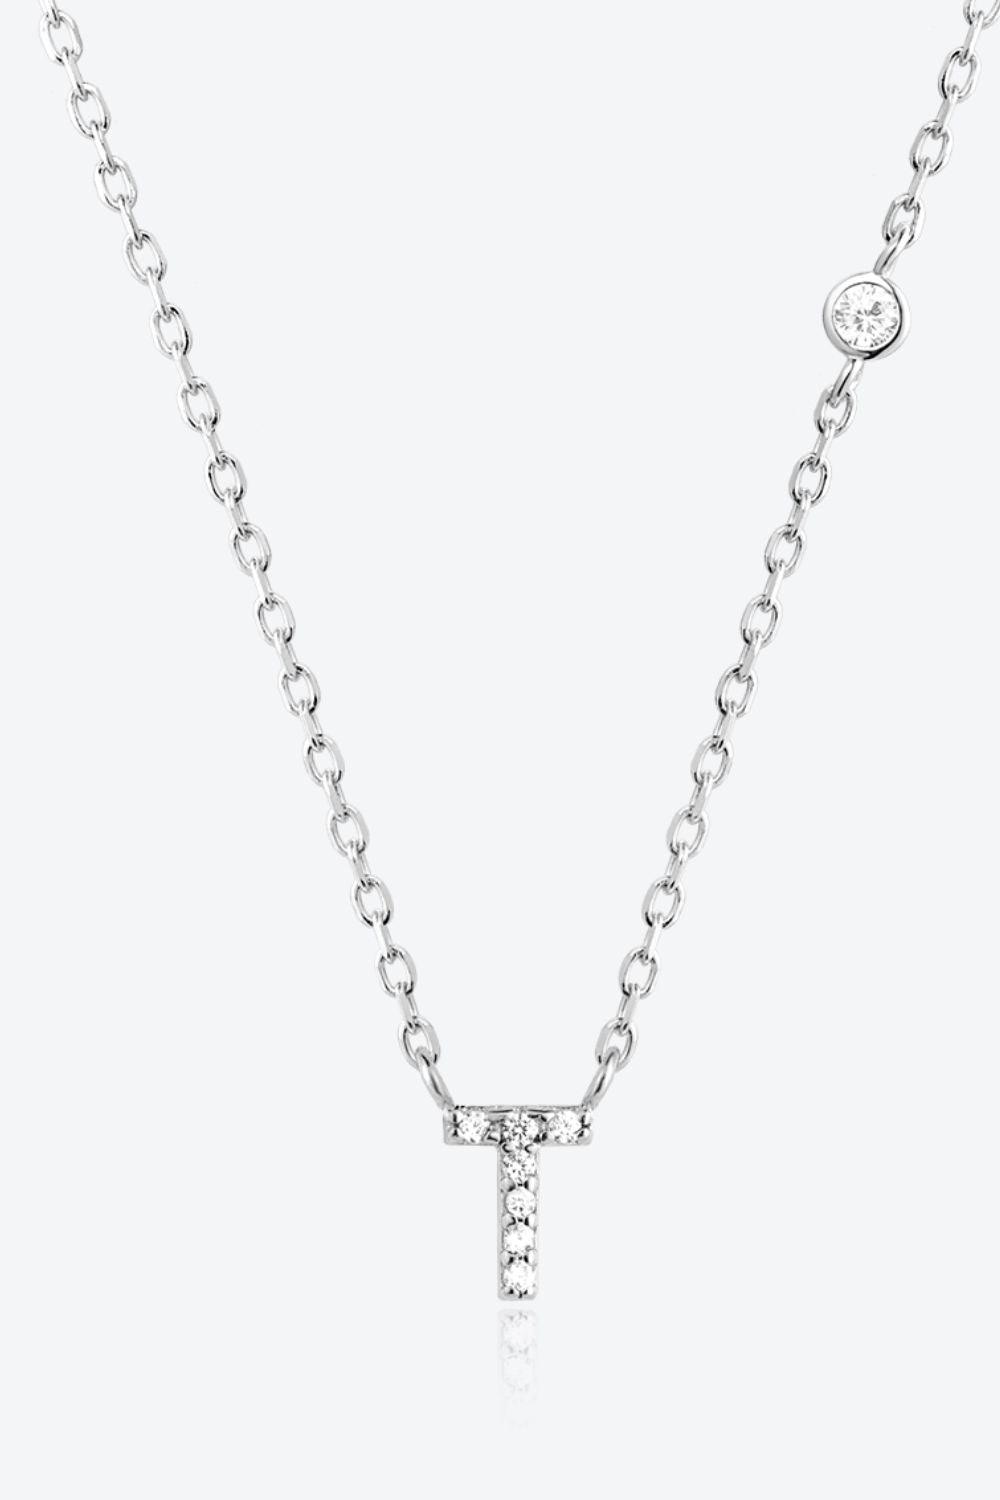 Q To U Zircon 925 Sterling Silver Necklace - Necklace